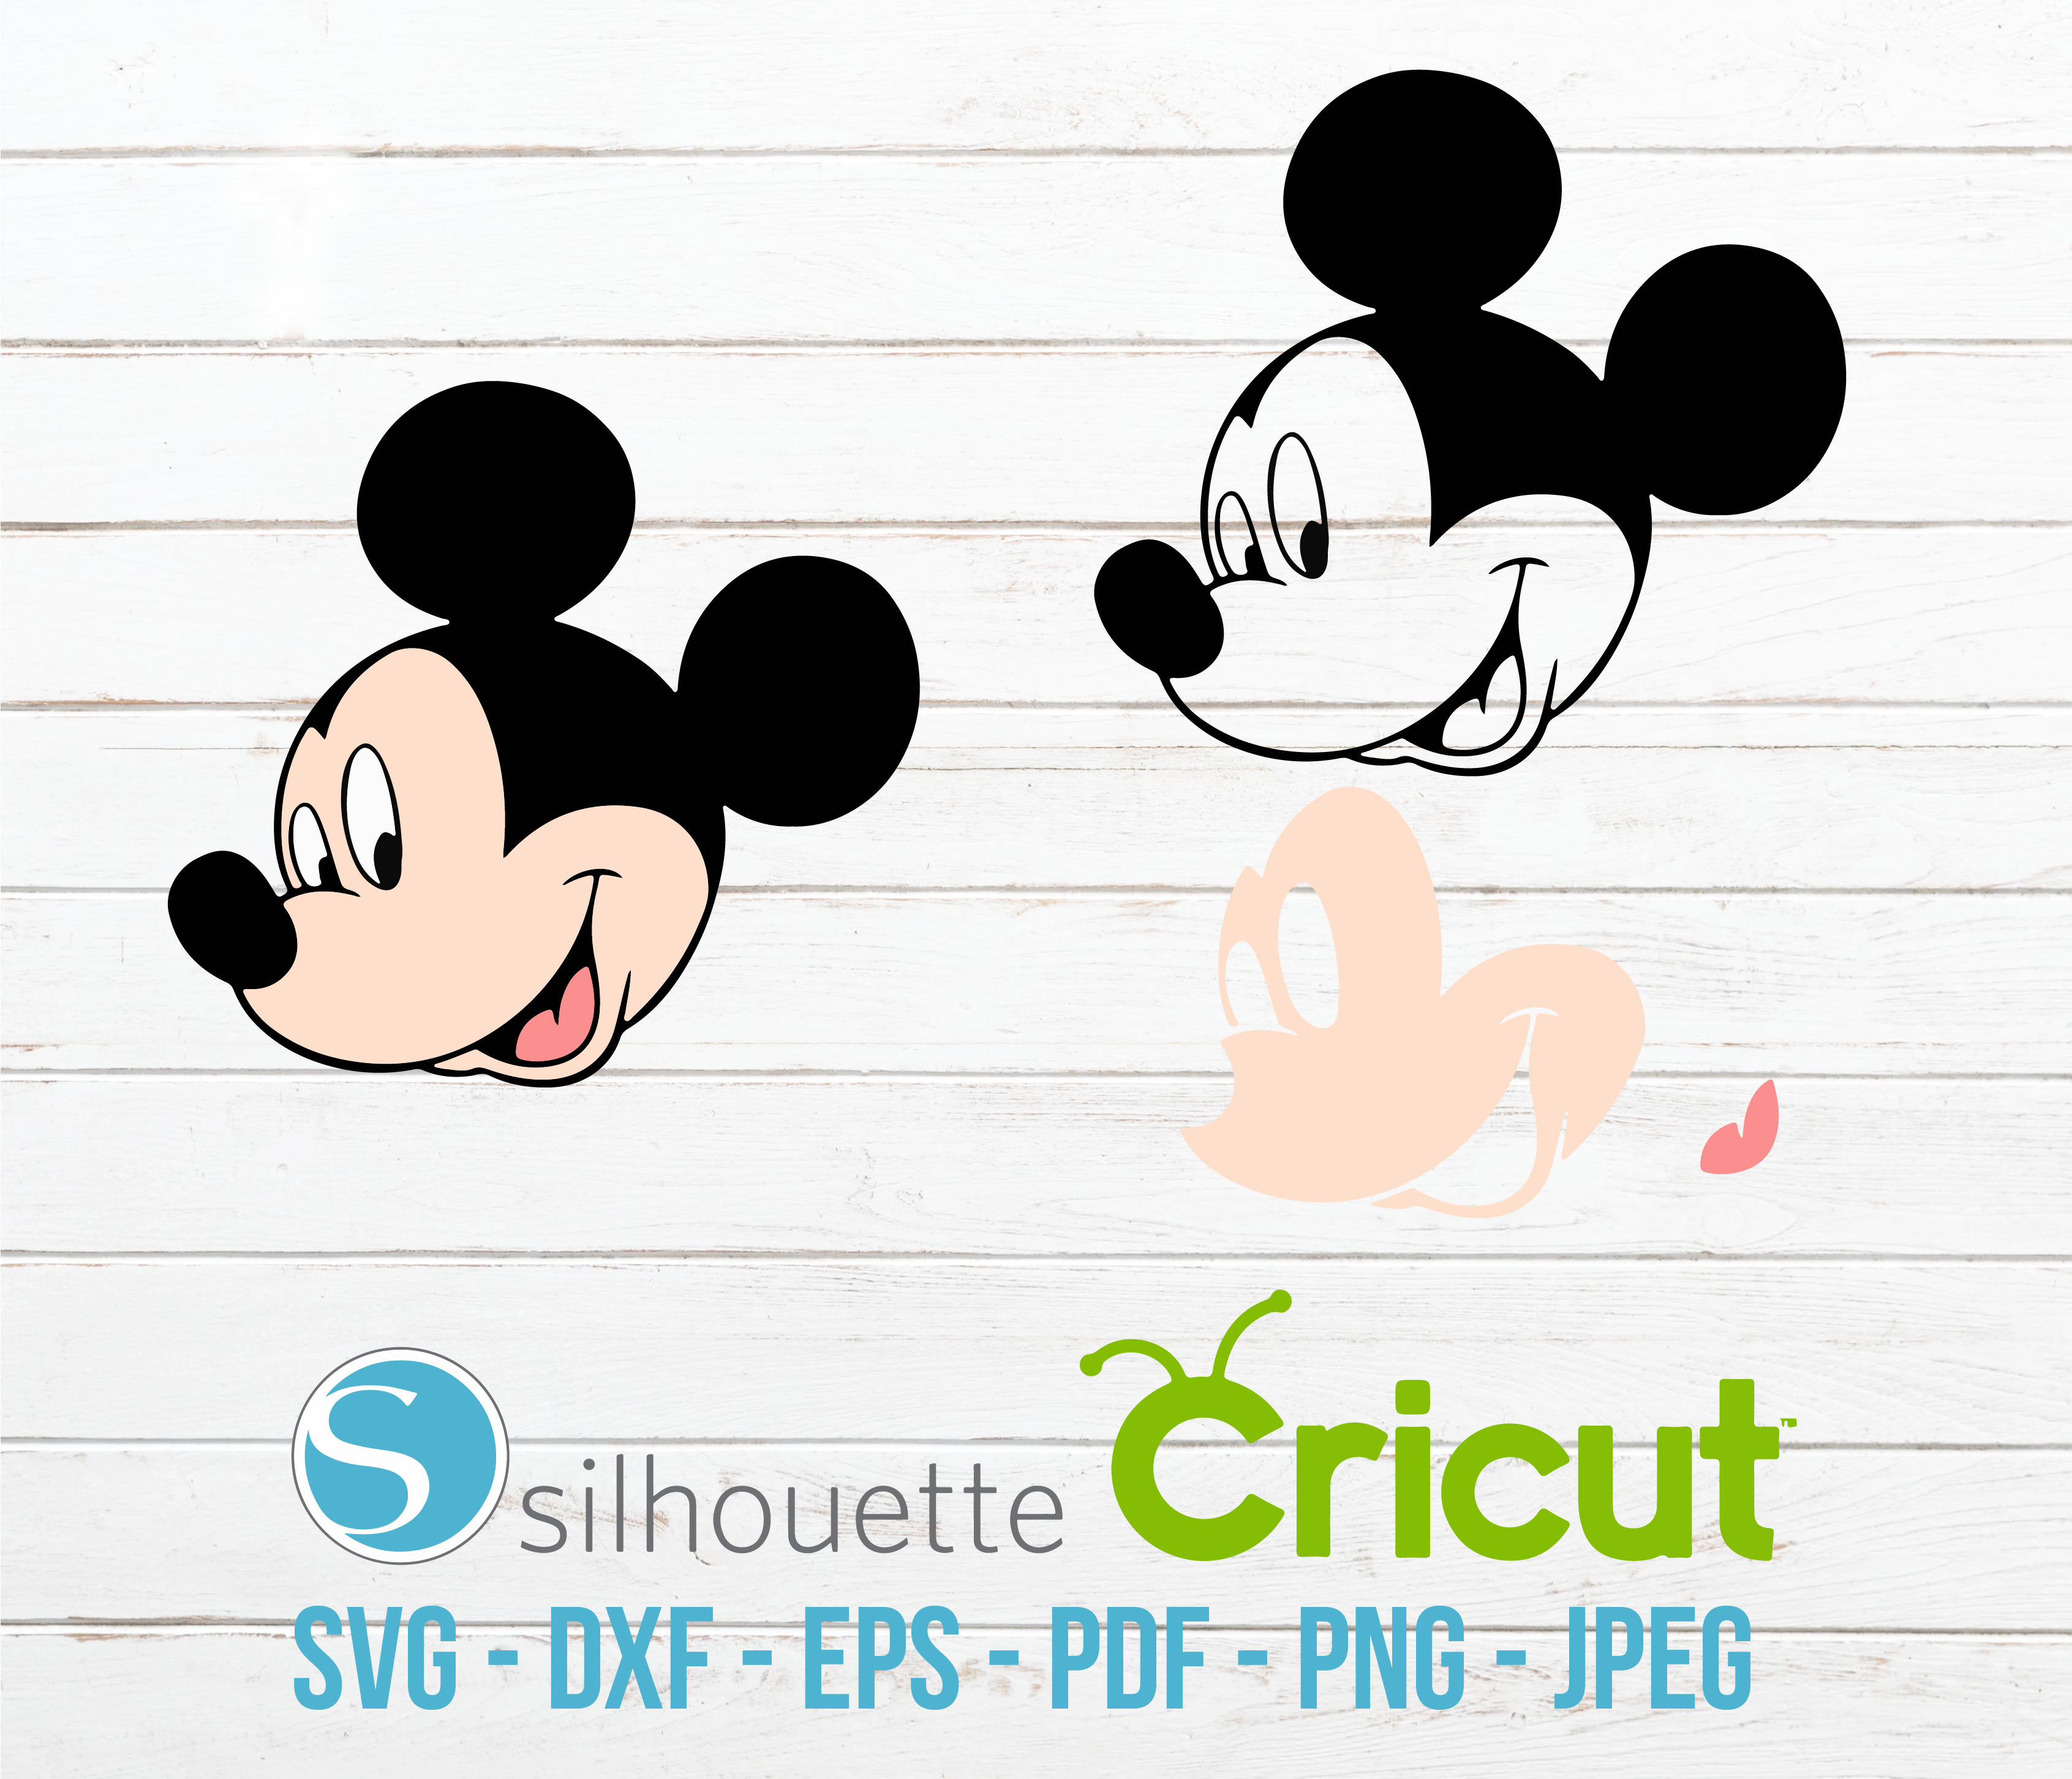 Download Convert Your Image To Svg Dxf Cutting File For Cricut Or Silhouette By Ptillow Fiverr